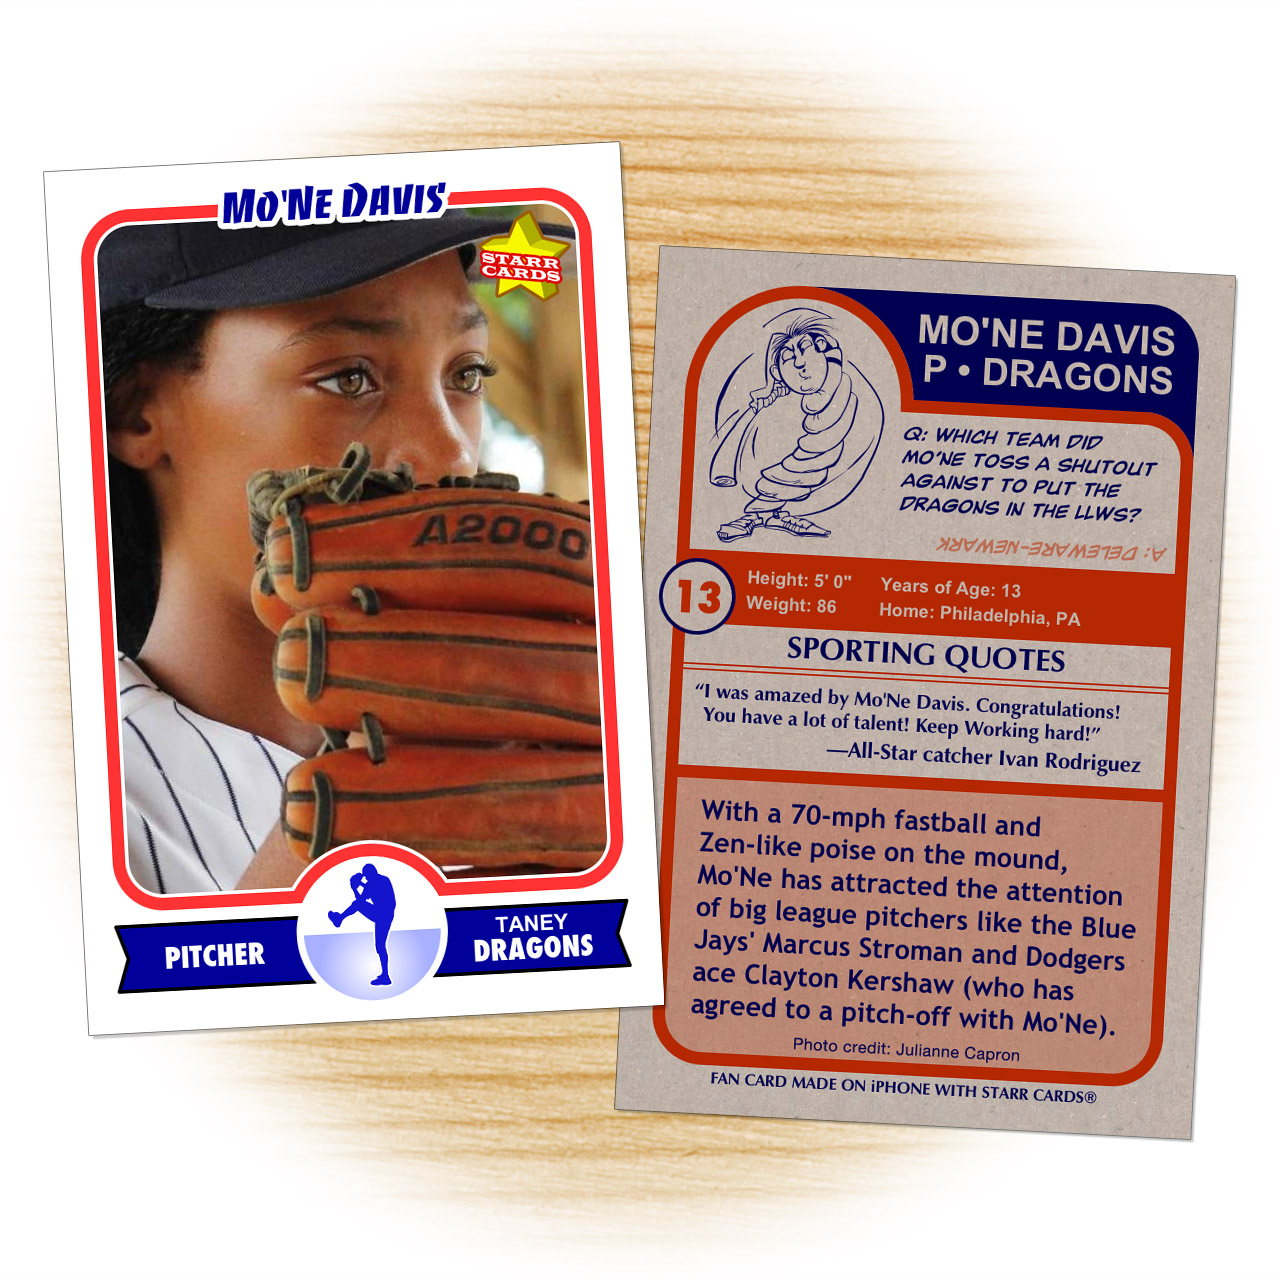 Baseball card of Mo'ne Davis made by a fan from Philly